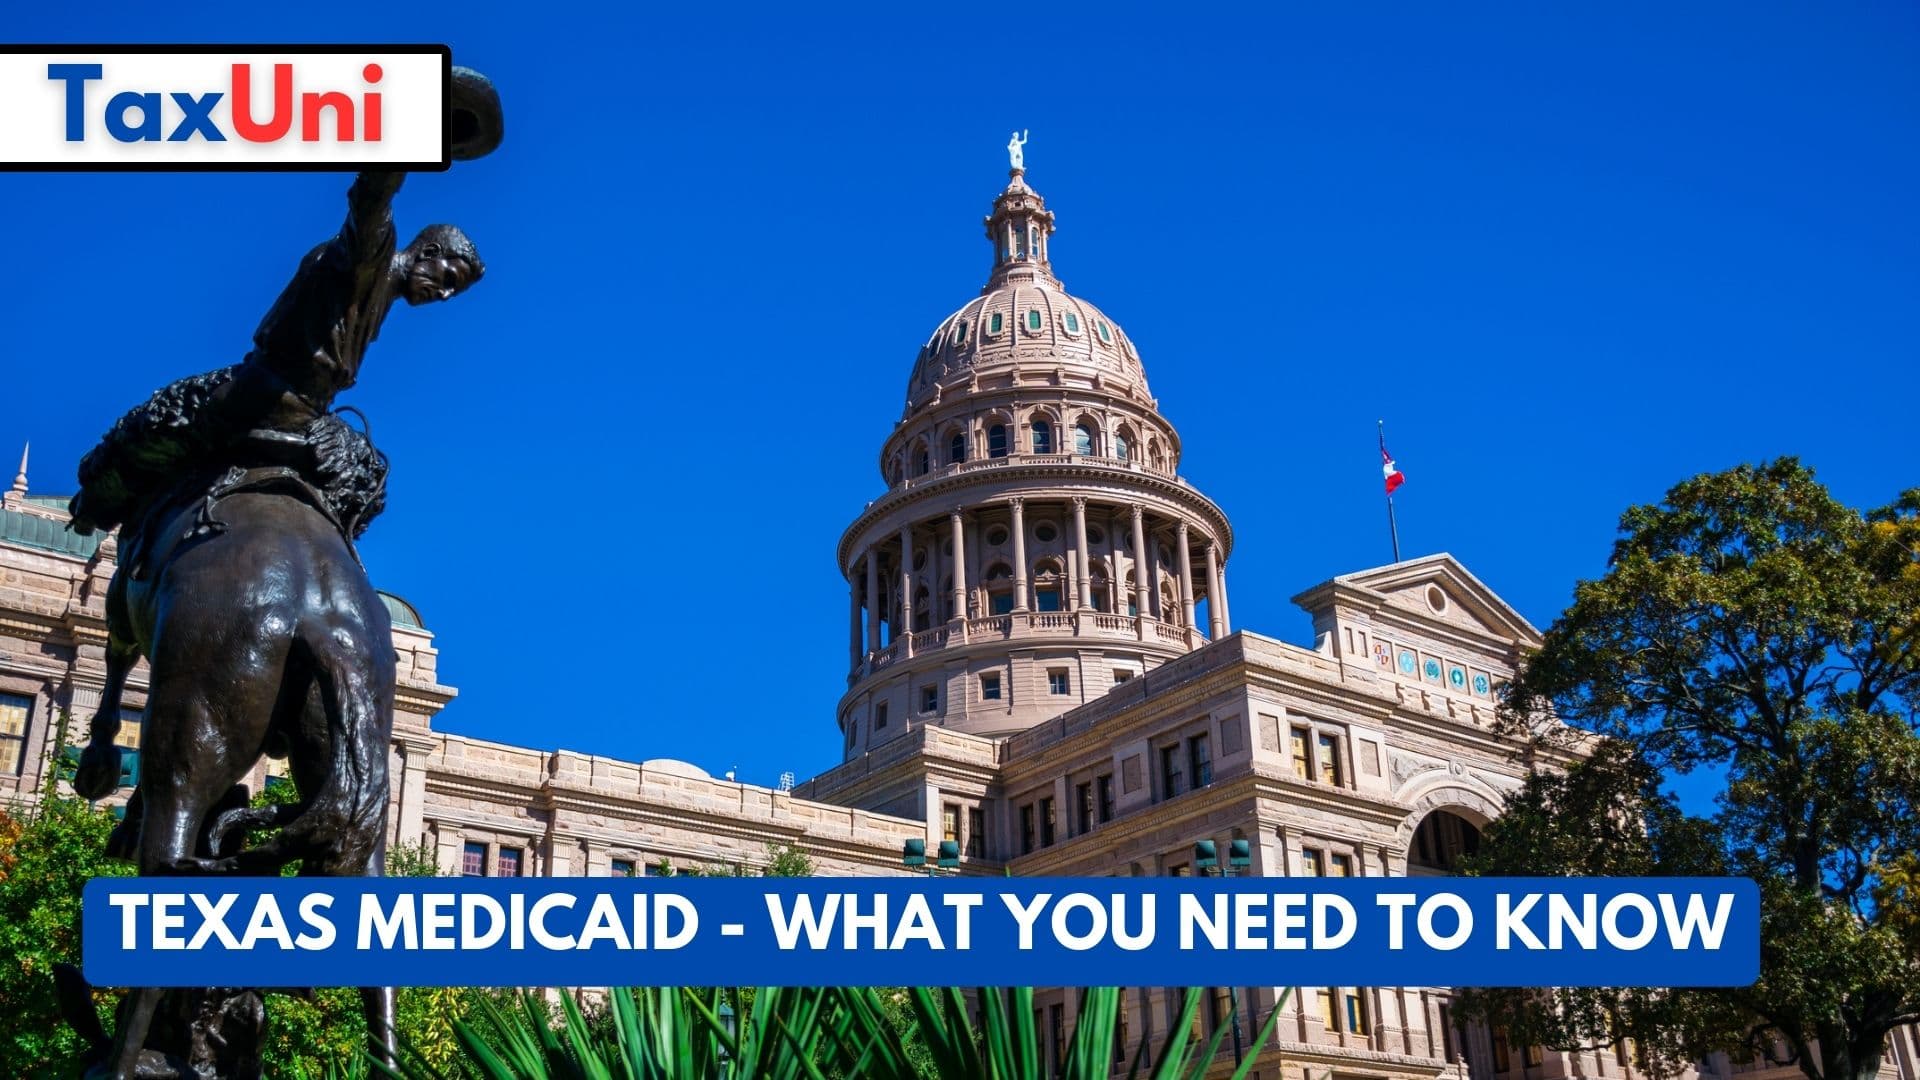 Texas Medicaid - What You Need to Know